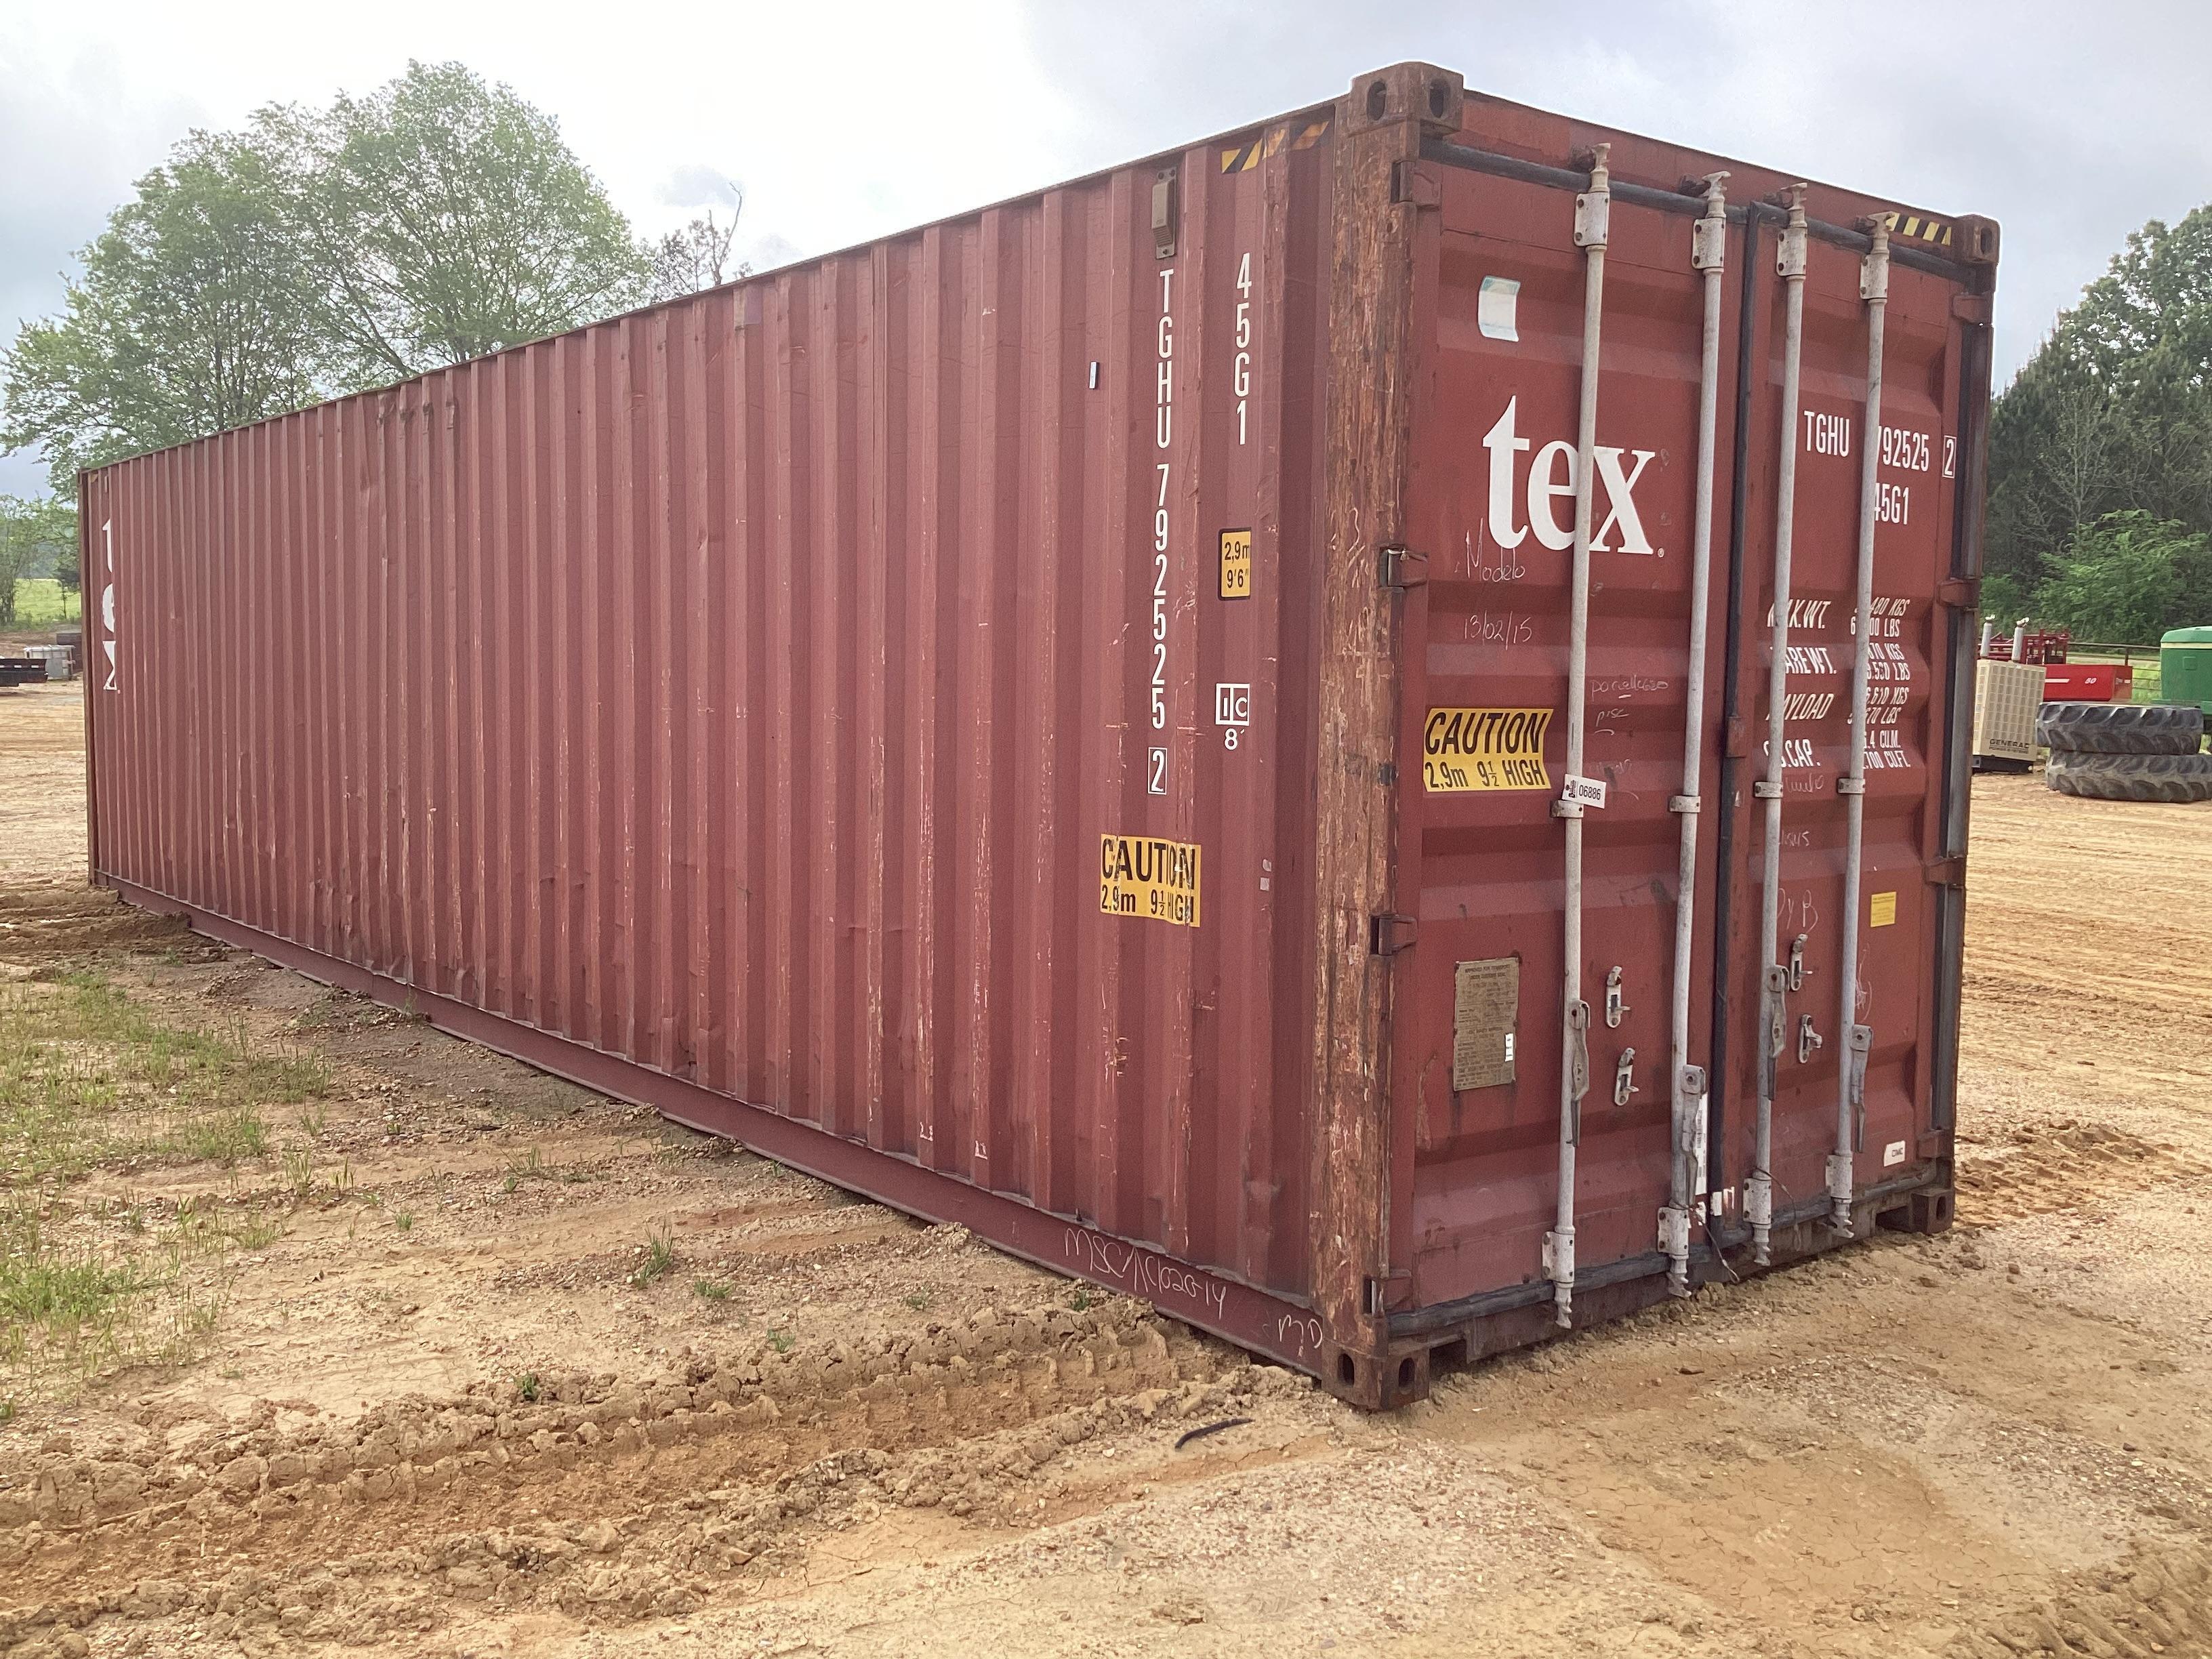 40? Shipping Container